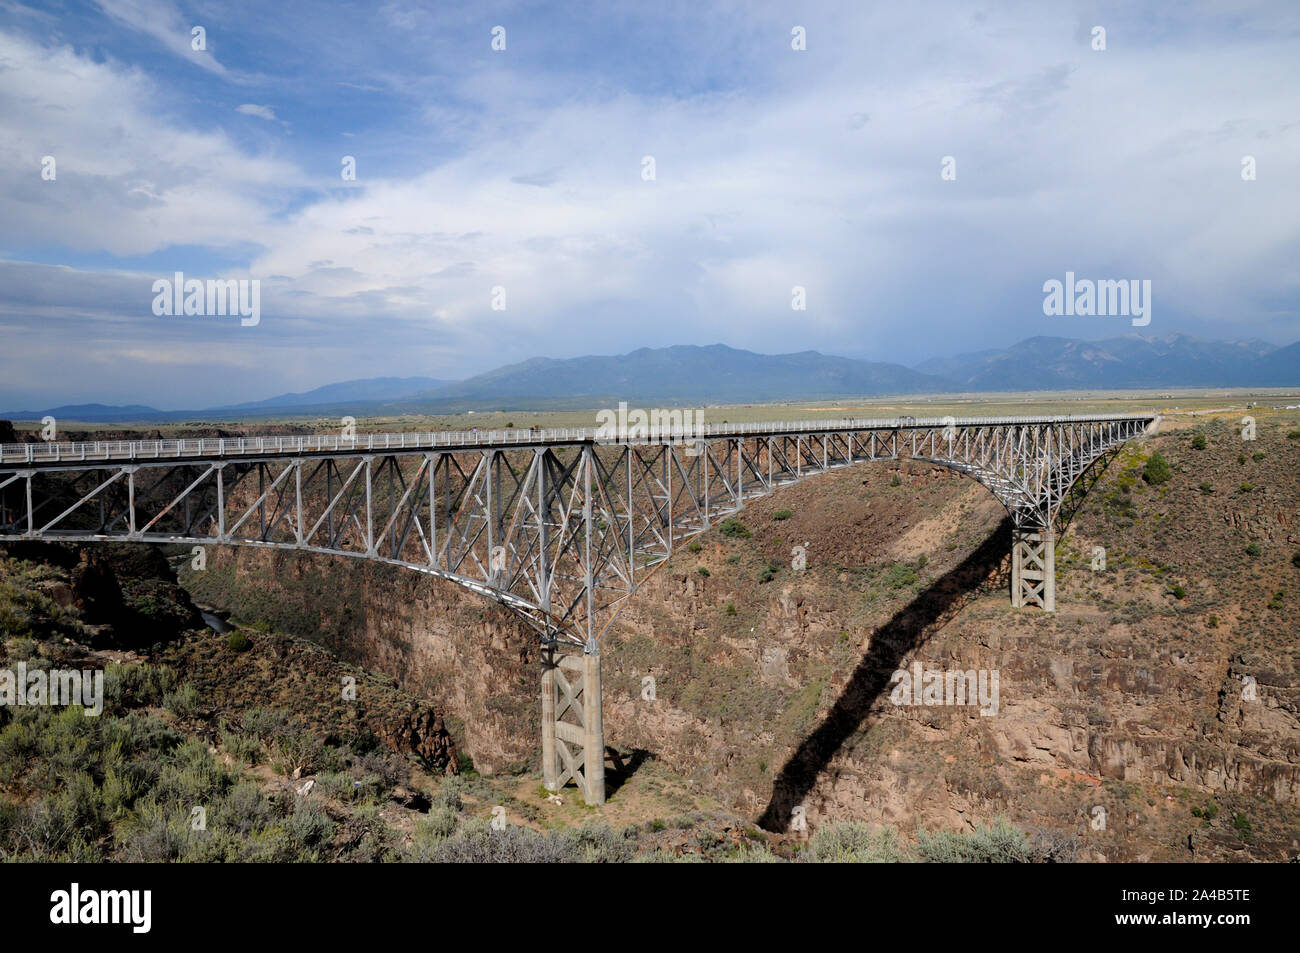 The Rio Grande Gorge bridge, sometimes called the Taos Gorge, on US64 just outside Taos, New Mexico. Stock Photo